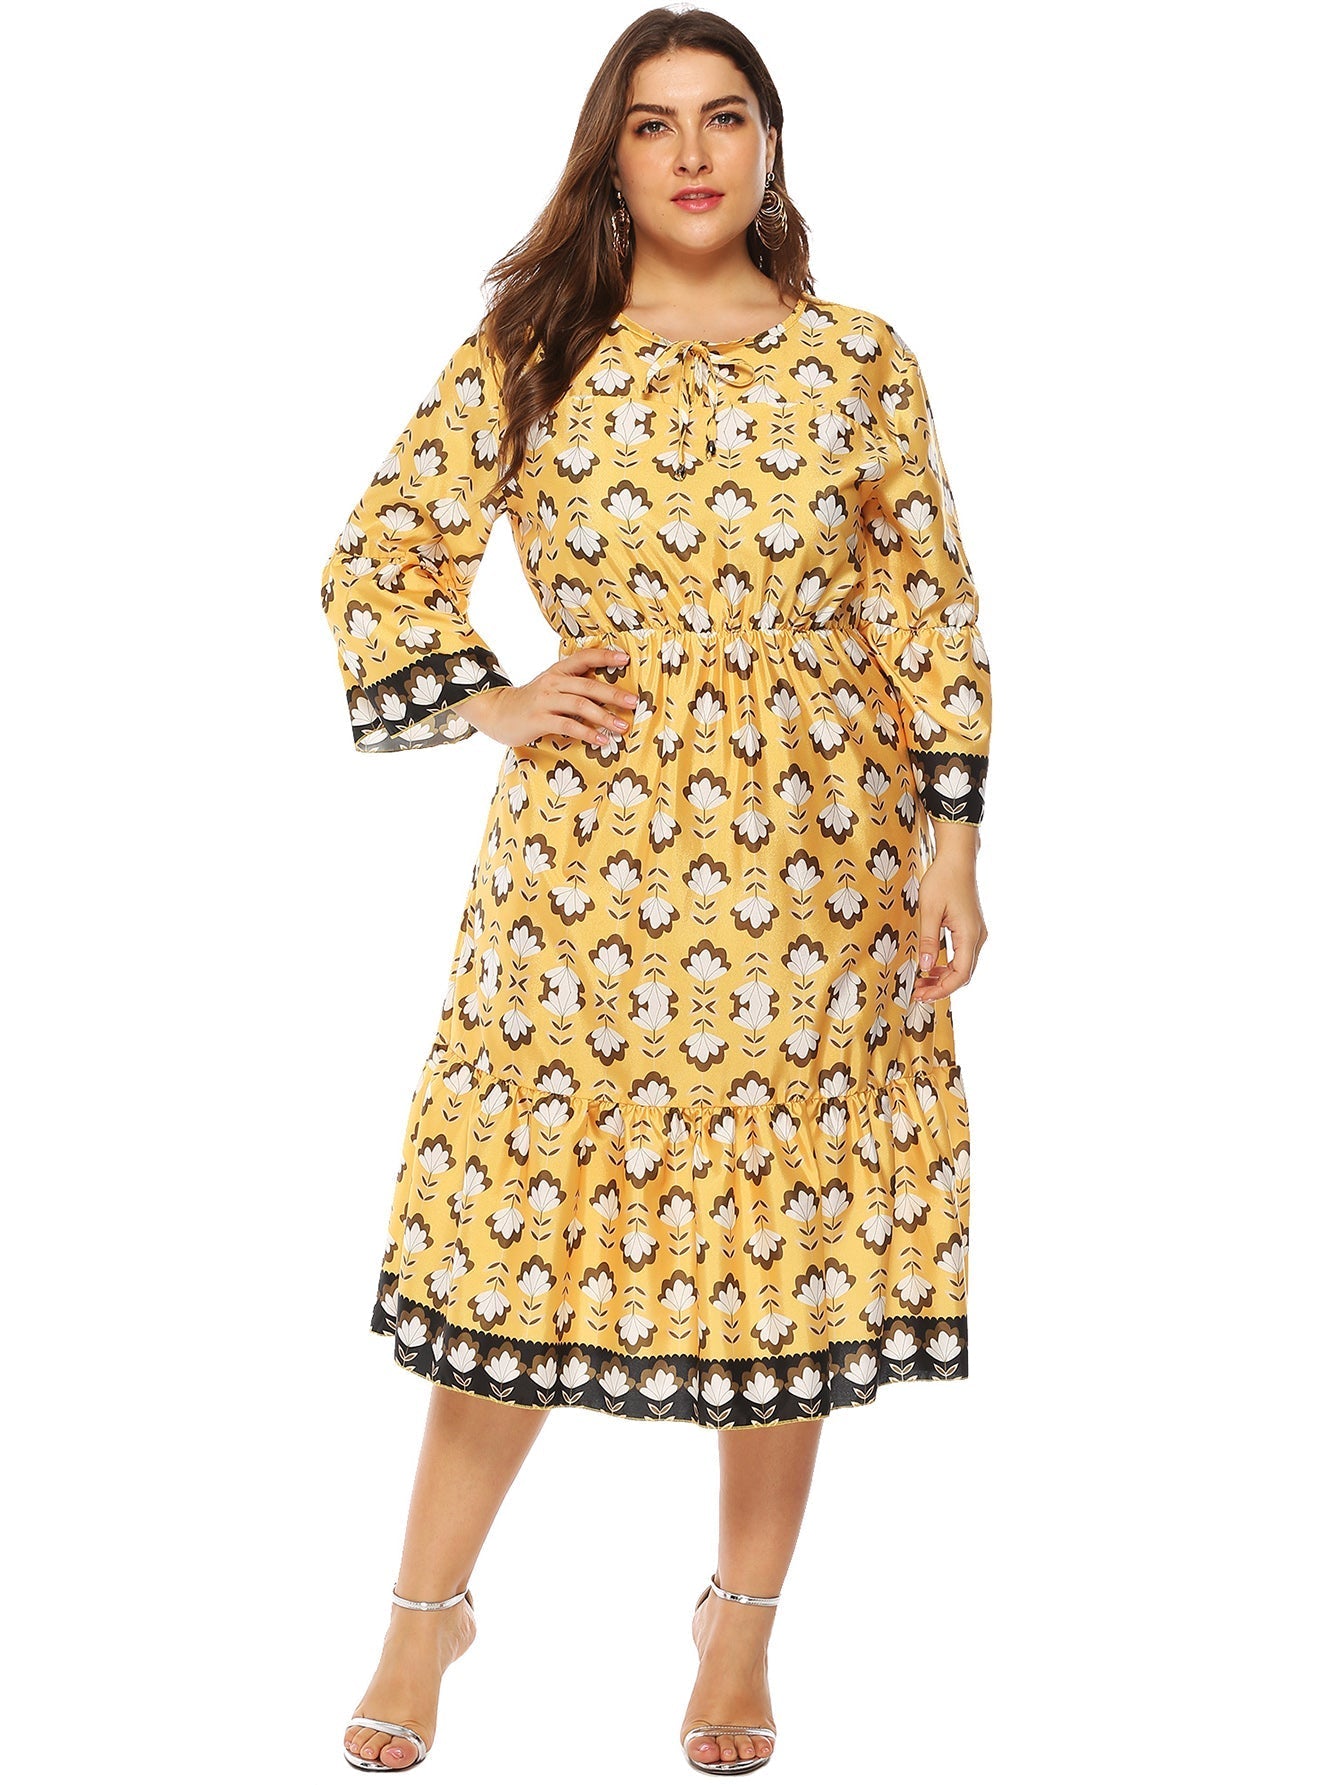 Plus All Over Print Tie Front Dress Sai Feel